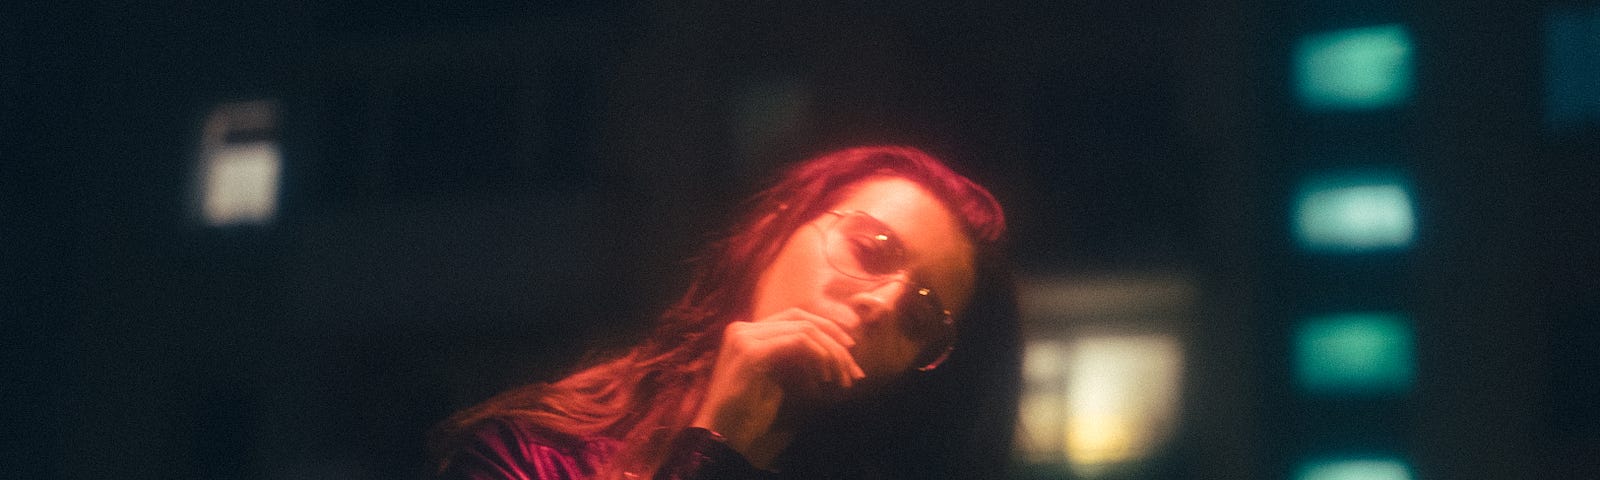 Image with a black background and a woman with red hair, glasses, and a leather jacket cocking her head to the side and looking into the camera, her hand in front of her mouth.